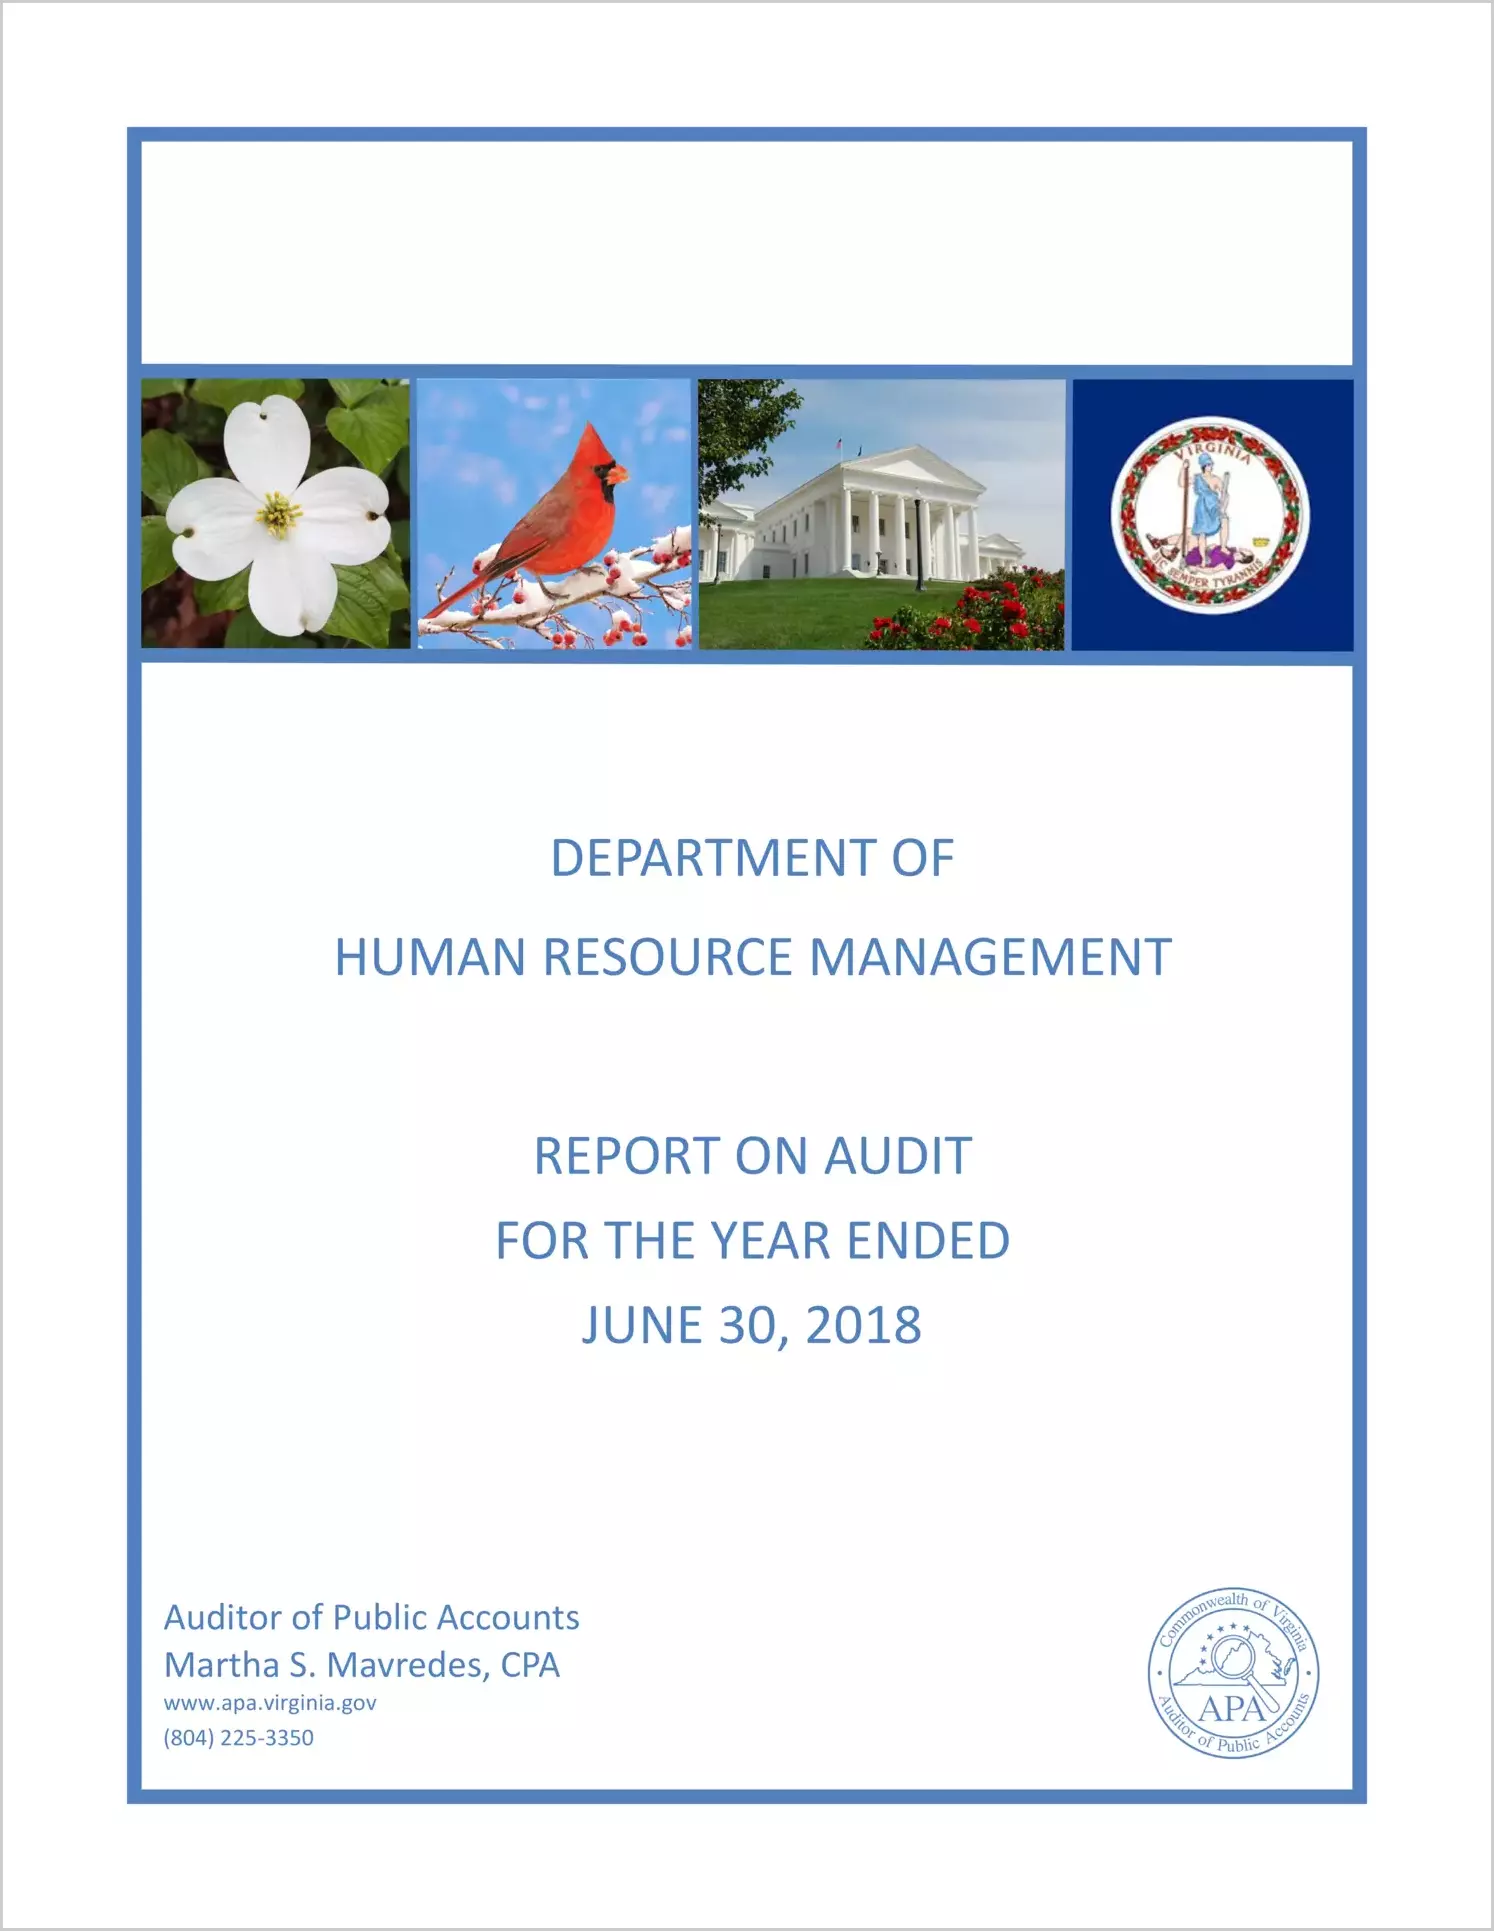 Department of Human Resource Management for the year ended June 30, 2018